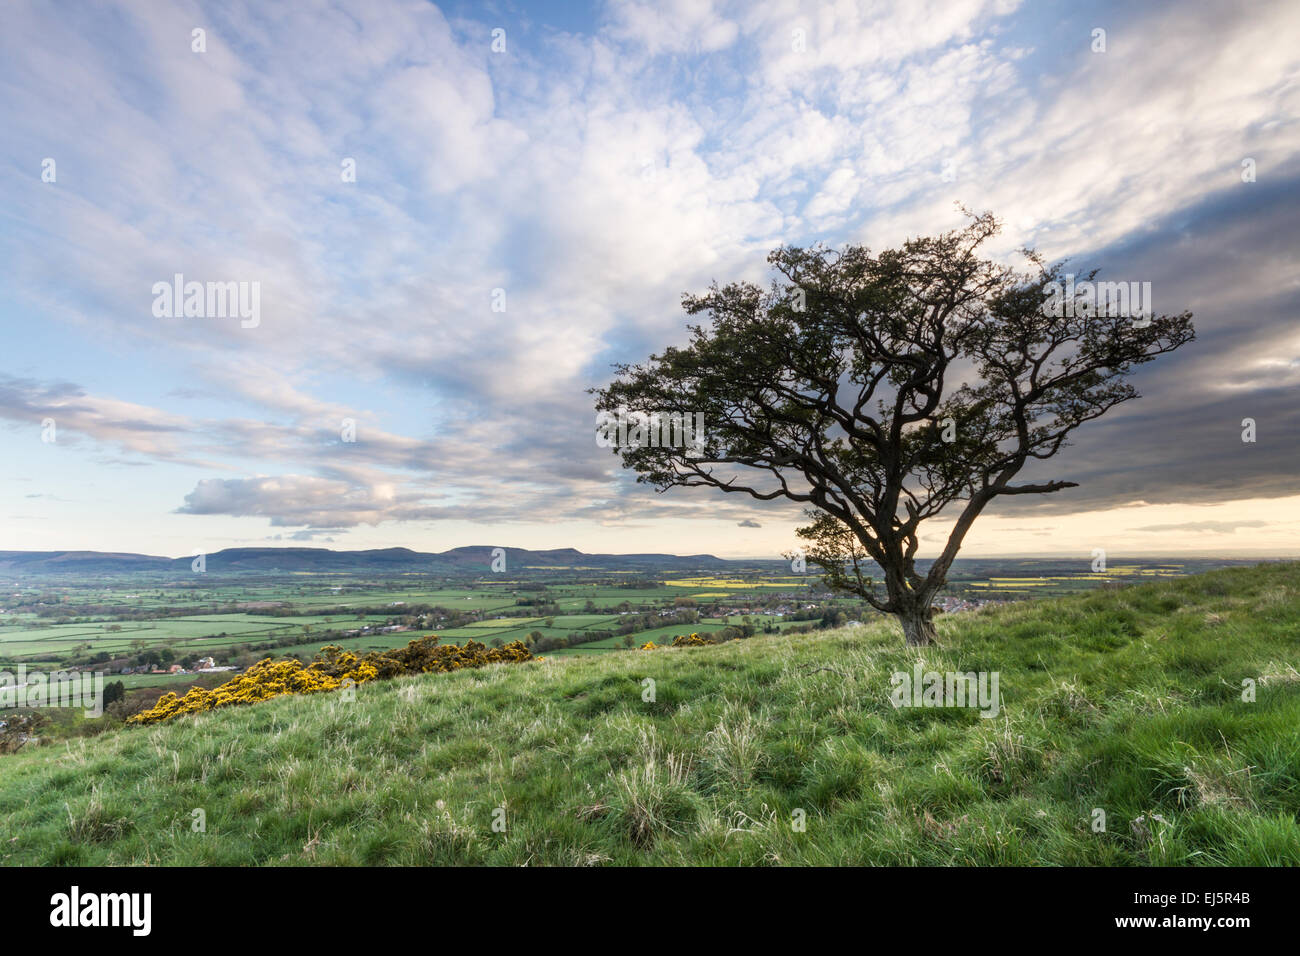 A lone hawthorn tree on the side of a hill overlooking the distant hills of the North Yorkshire Moors on a beautiful day in May. Stock Photo